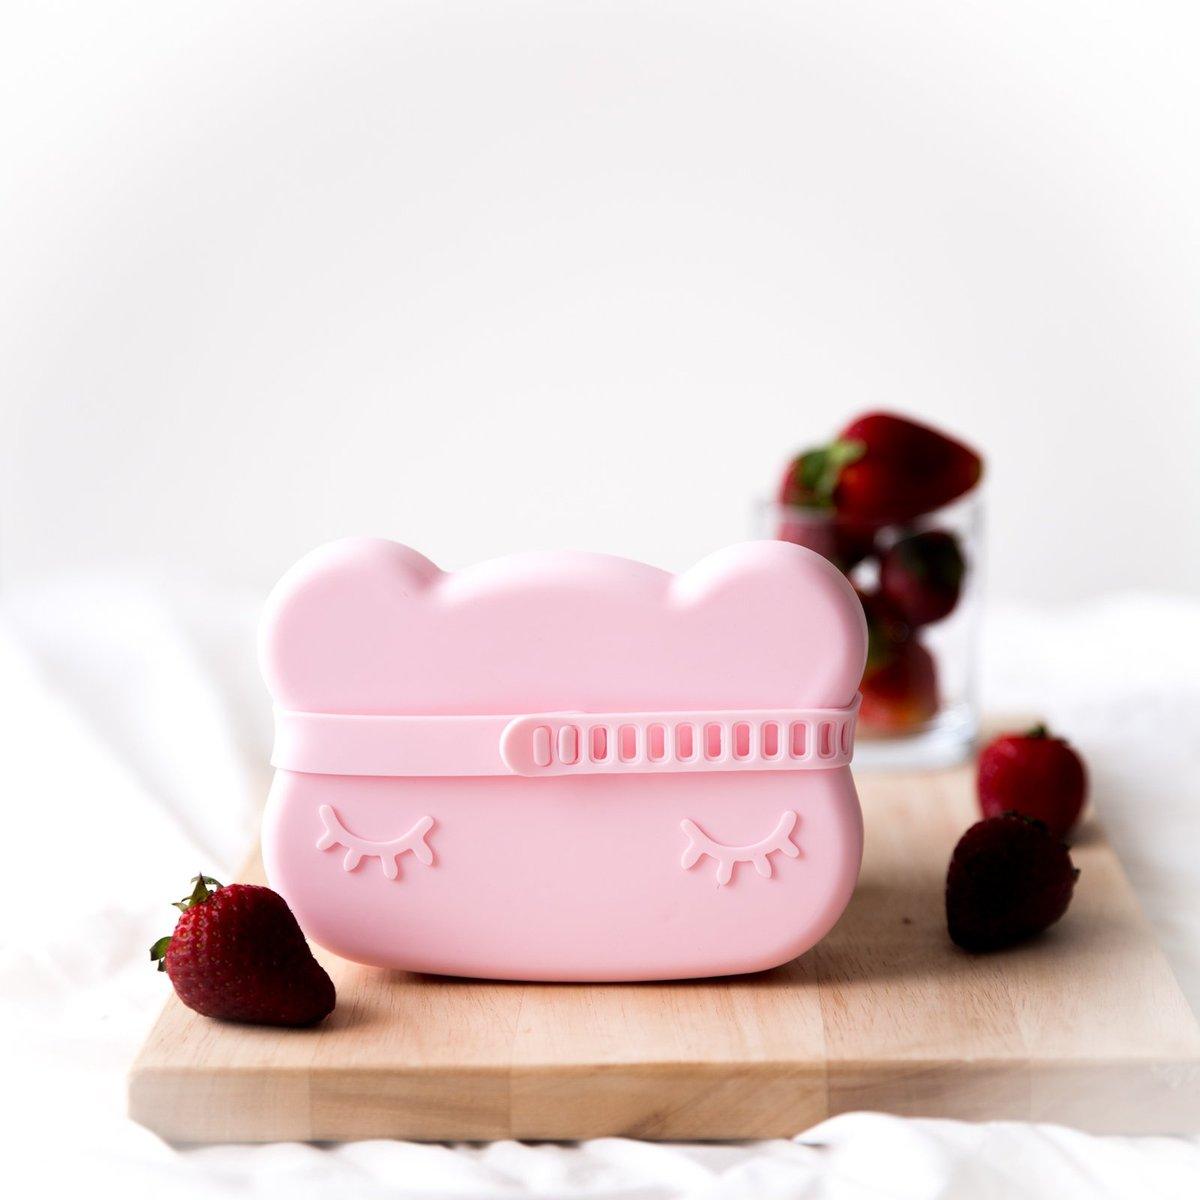 We Might Be Tiny: Bear Snackie silicone snack container